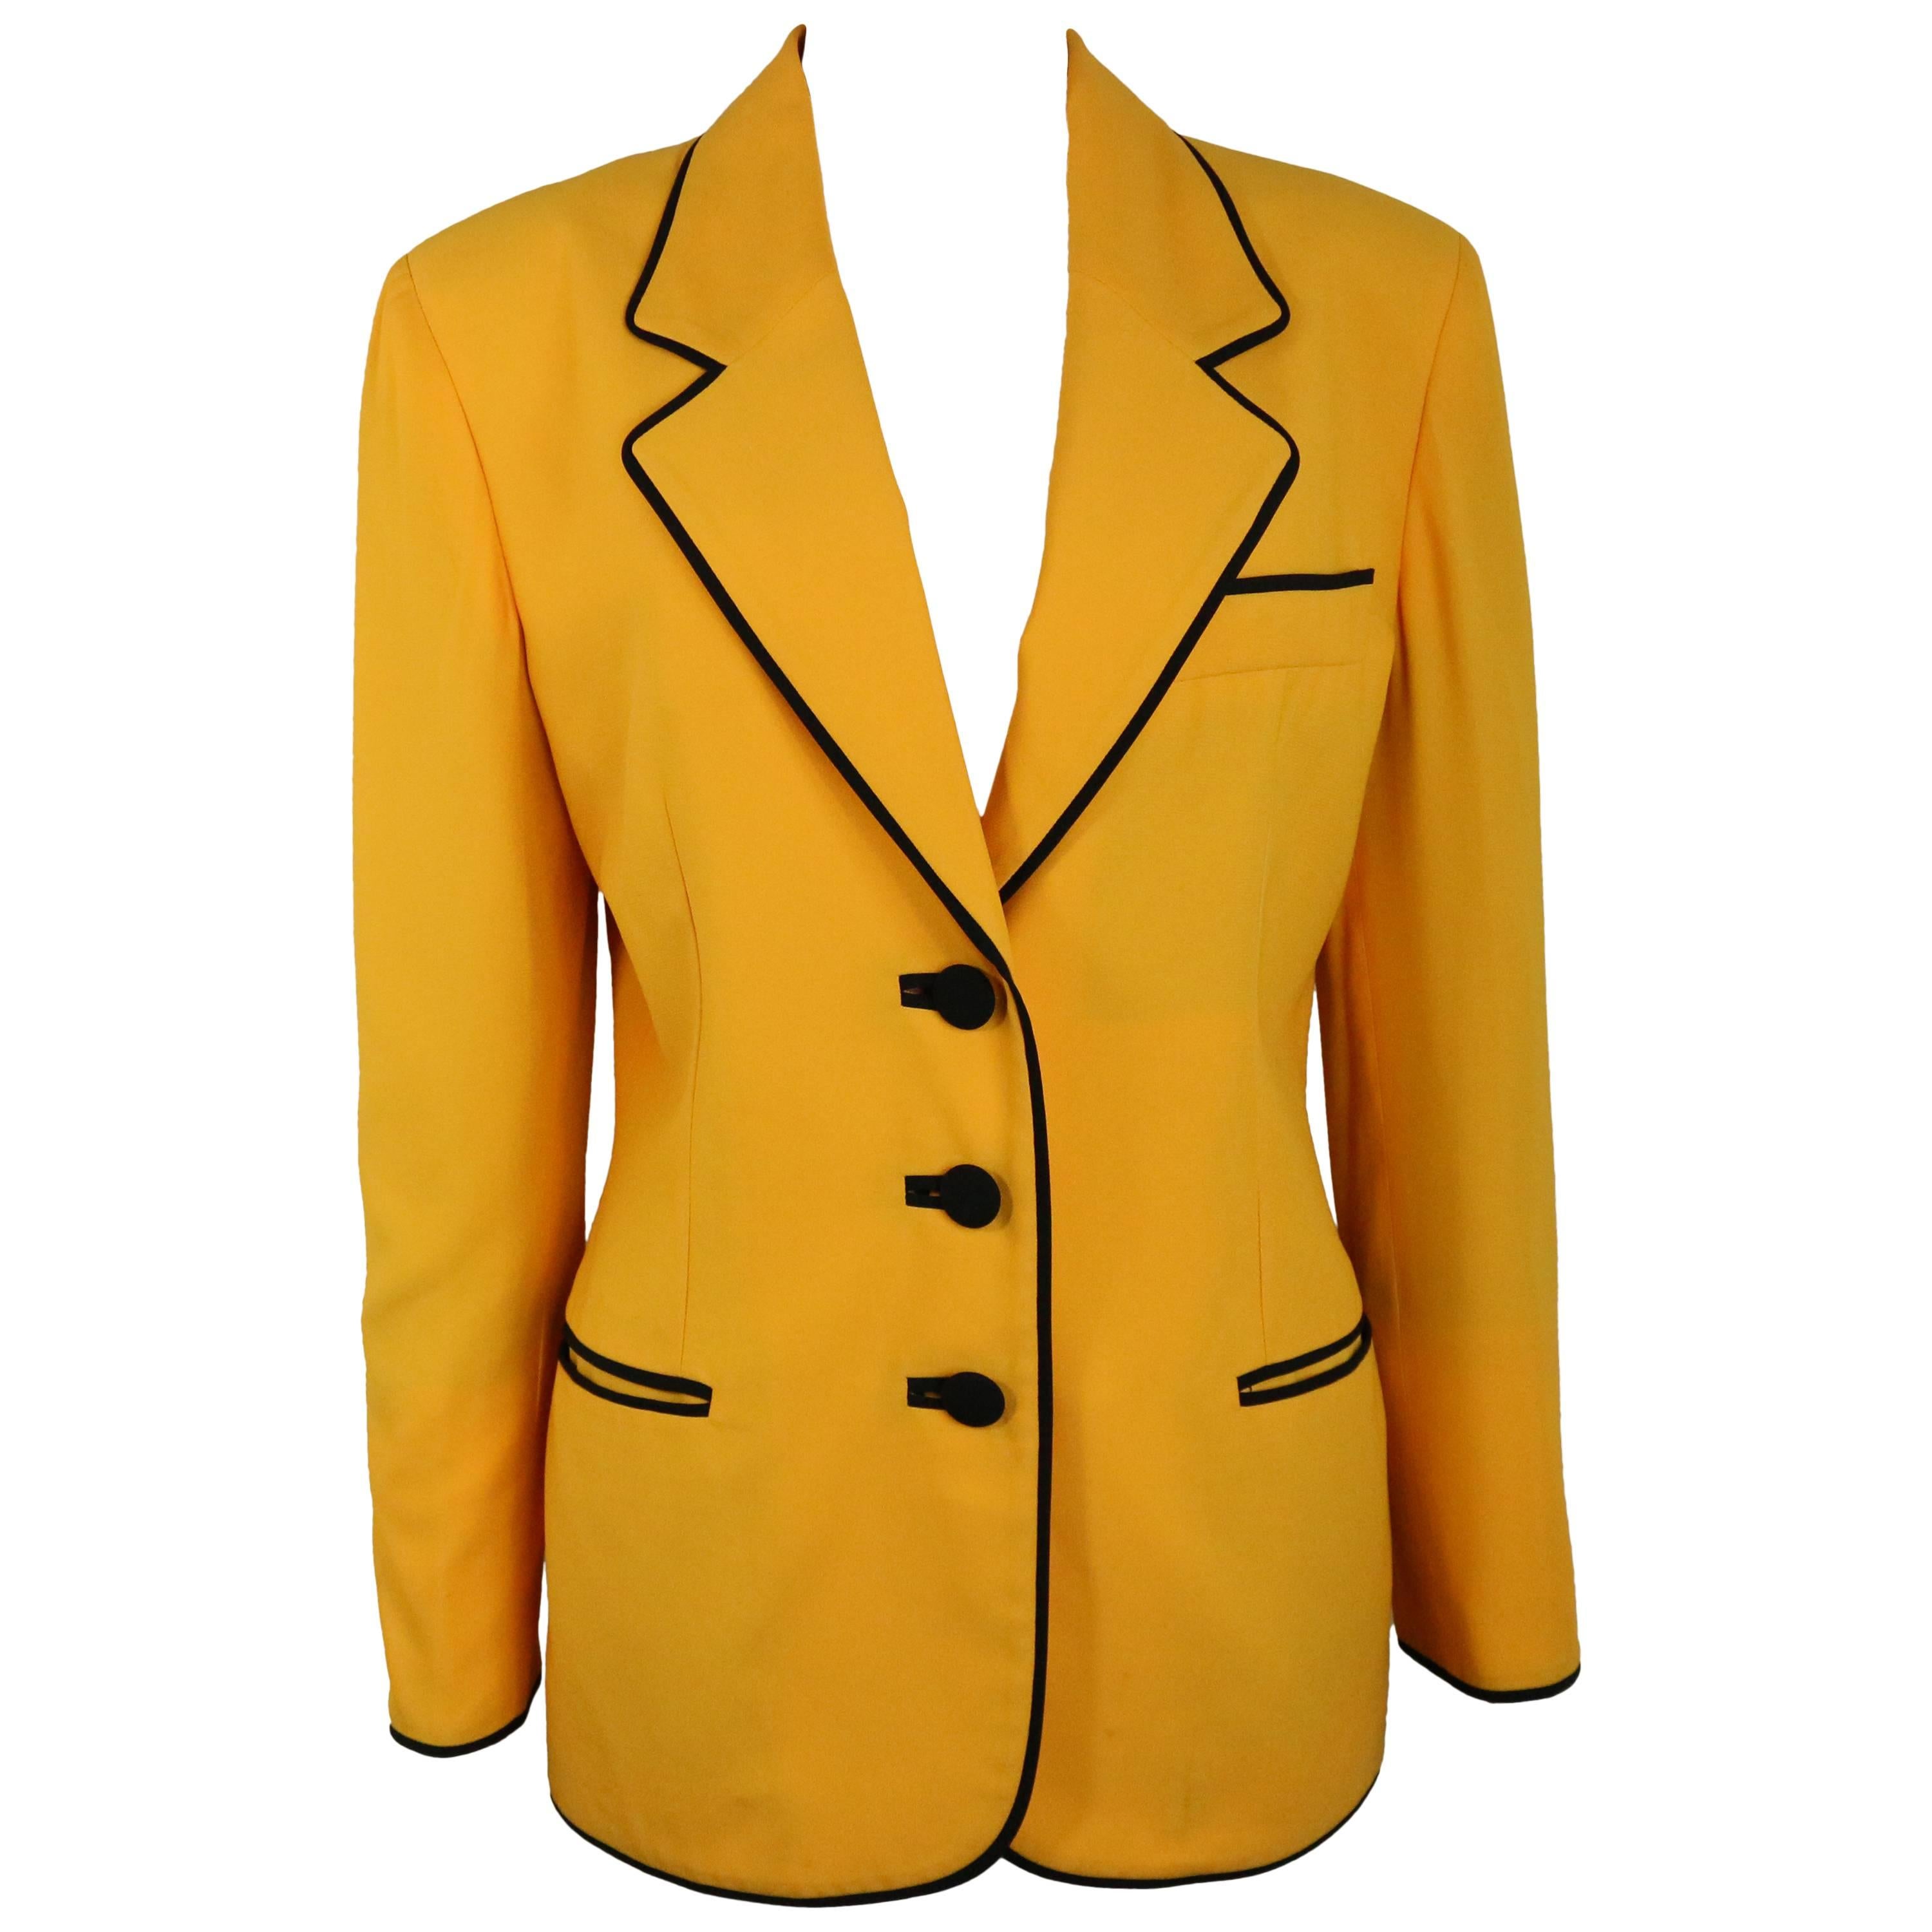 - Vintage 90s Moschino Couture yellow black piping jacket with iconic 